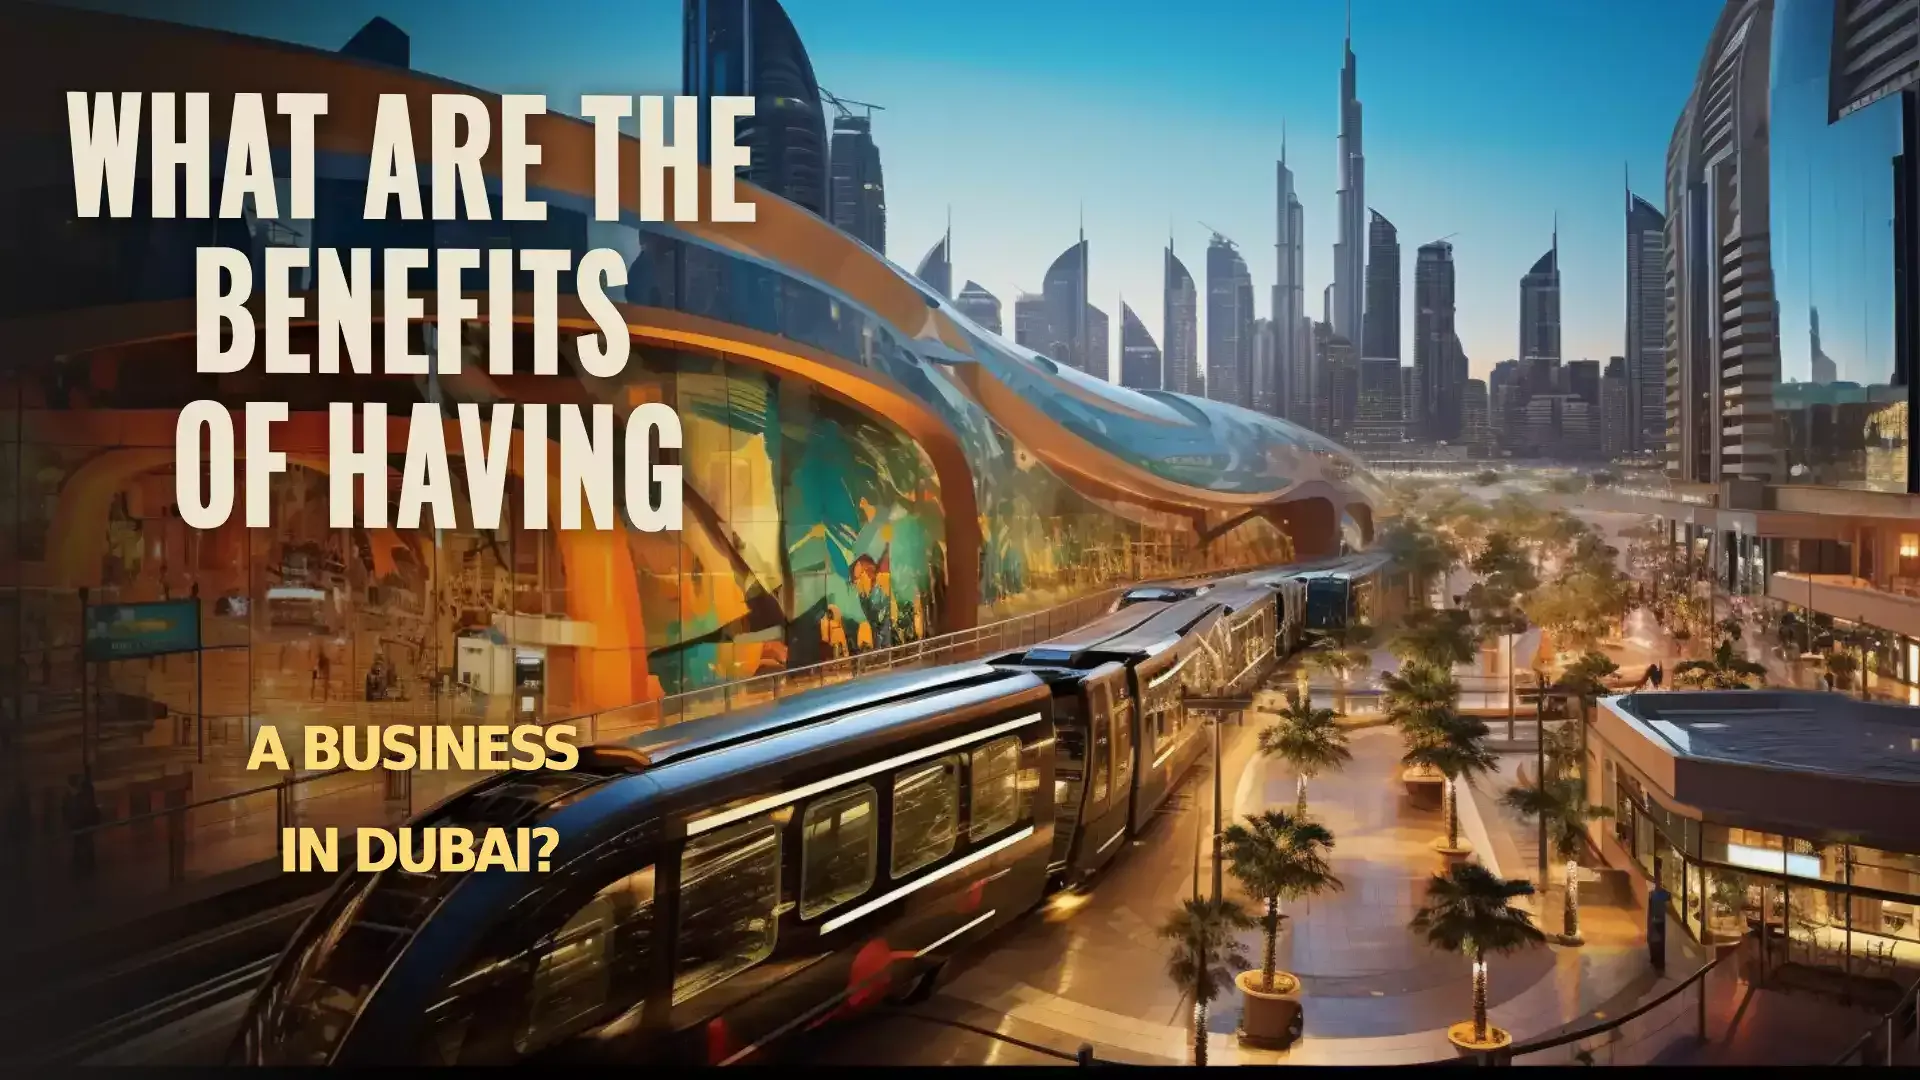 Image displaying the various benefits and advantages of establishing a business in Dubai